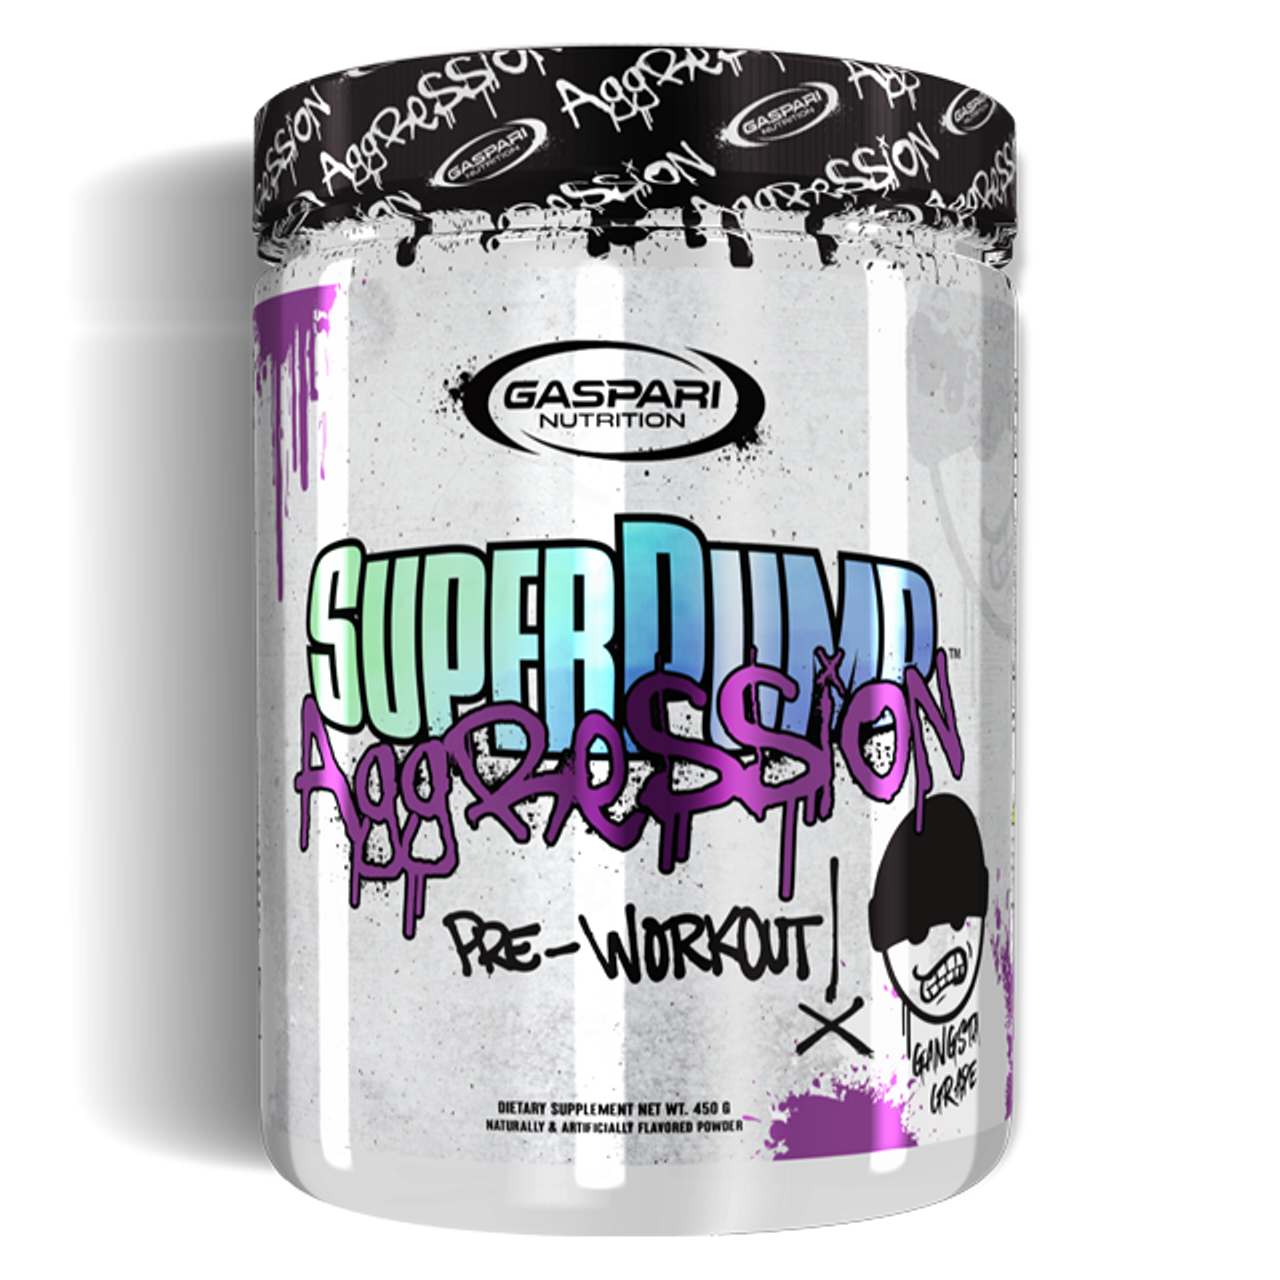 THE NEXT-GEN PRE-WORKOUT / LET OUT YOUR AGGRESSION!!
Euphoric Energy
Laser Focus
Skin tearing pumps
No Crash or jitters